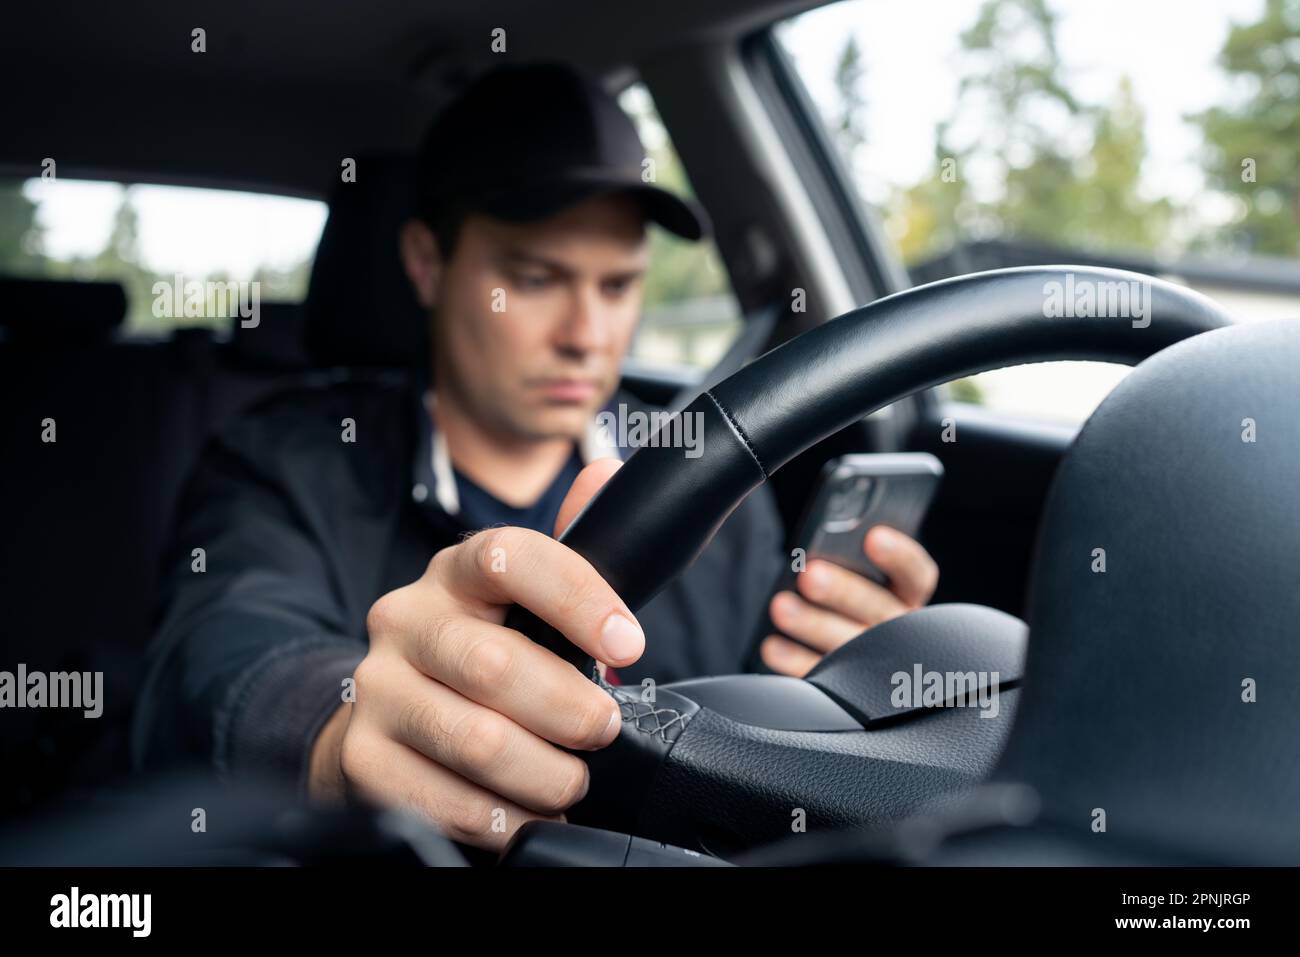 Driving car and using phone to text. Driver using cellphone. Accident, crash and danger in traffic. Man texting with mobile app. Stock Photo